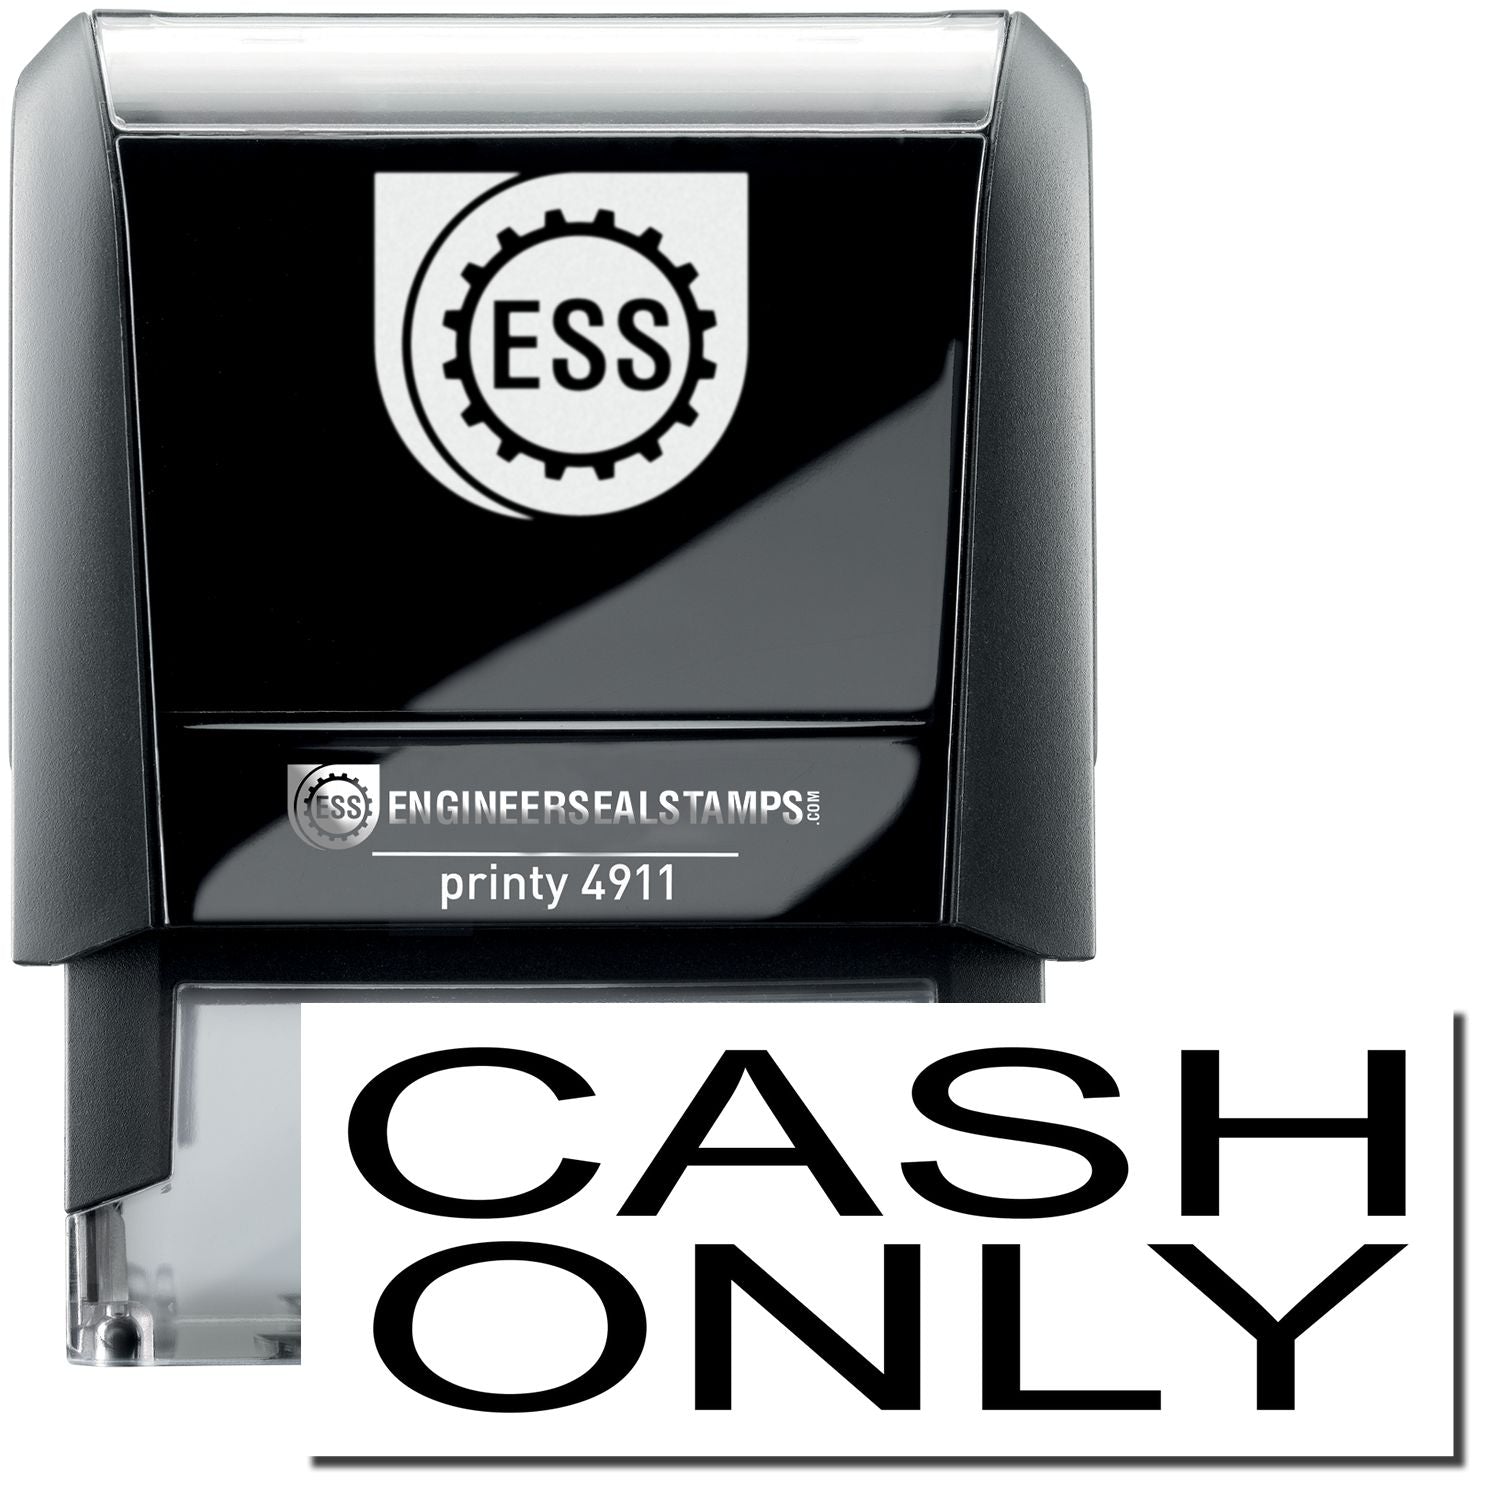 A self-inking stamp with a stamped image showing how the text "CASH ONLY" is displayed after stamping.